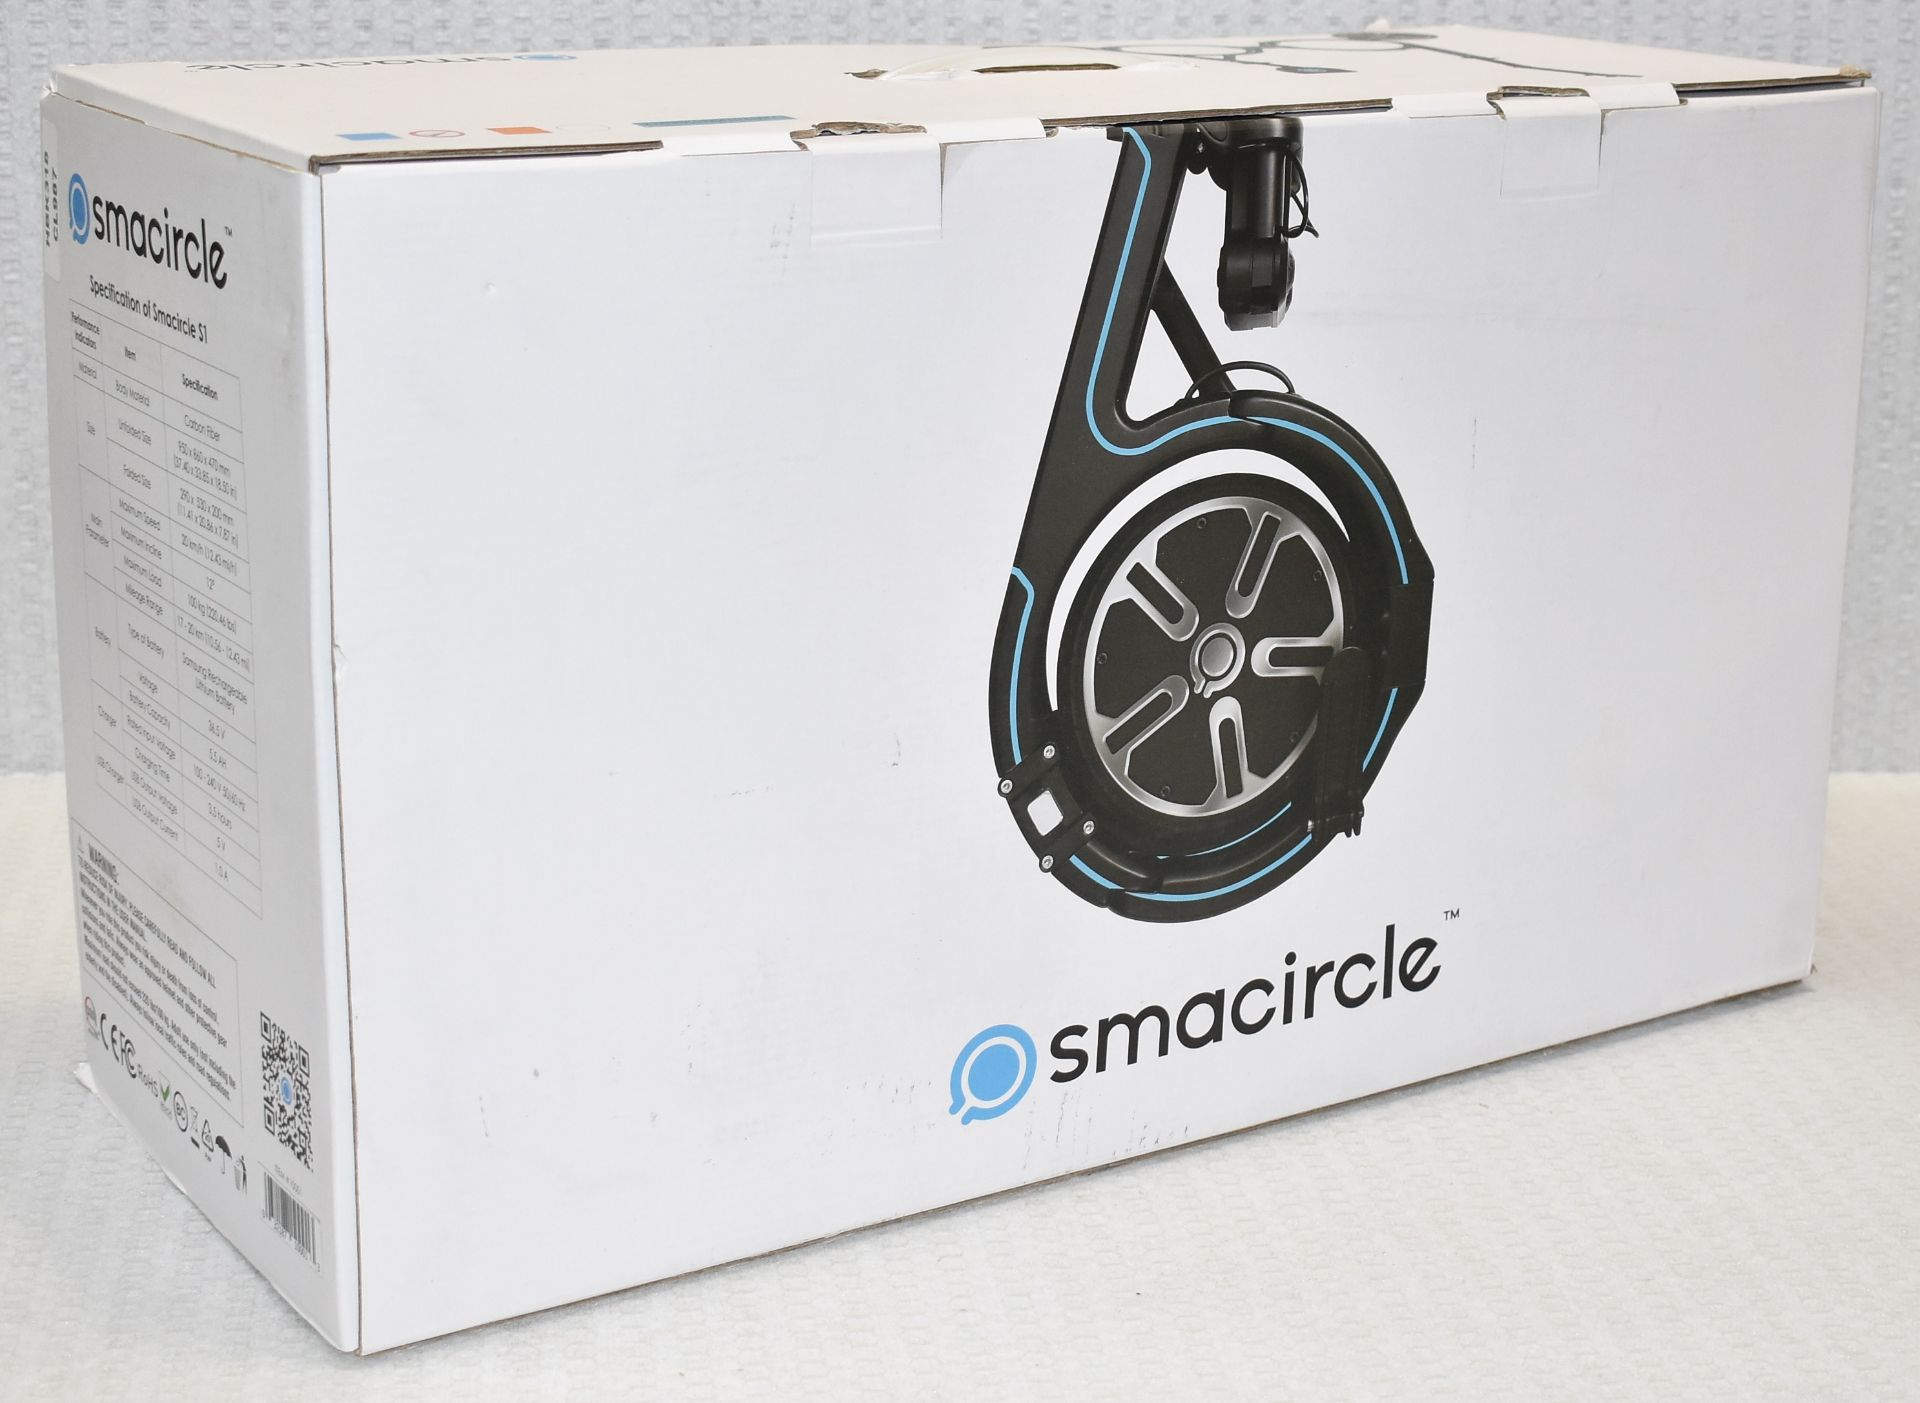 1 x SMACIRCLE S1 Super Compact Foldable Electric Bike - Original RRP £1,299 - Boxed with Accessories - Image 7 of 12